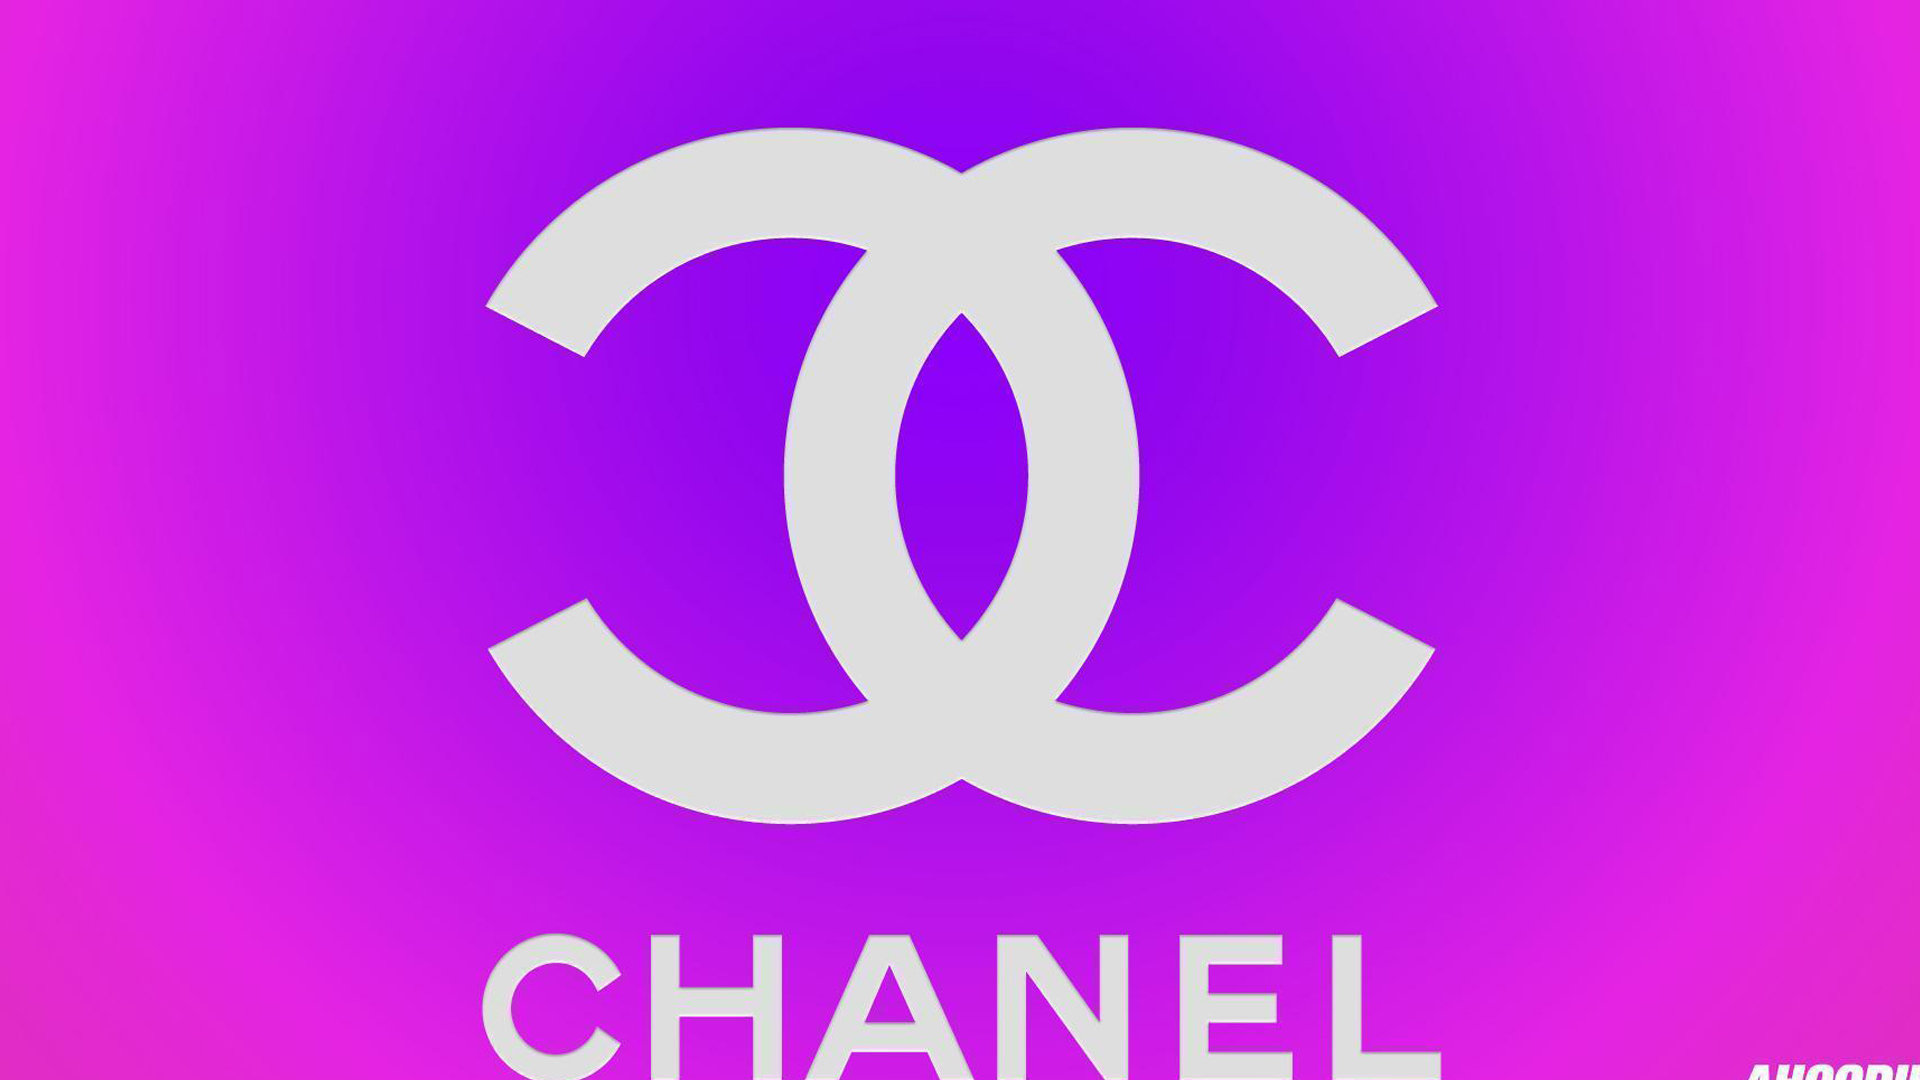 Chanel logo in pink and purple Wallpaper 2K chanel